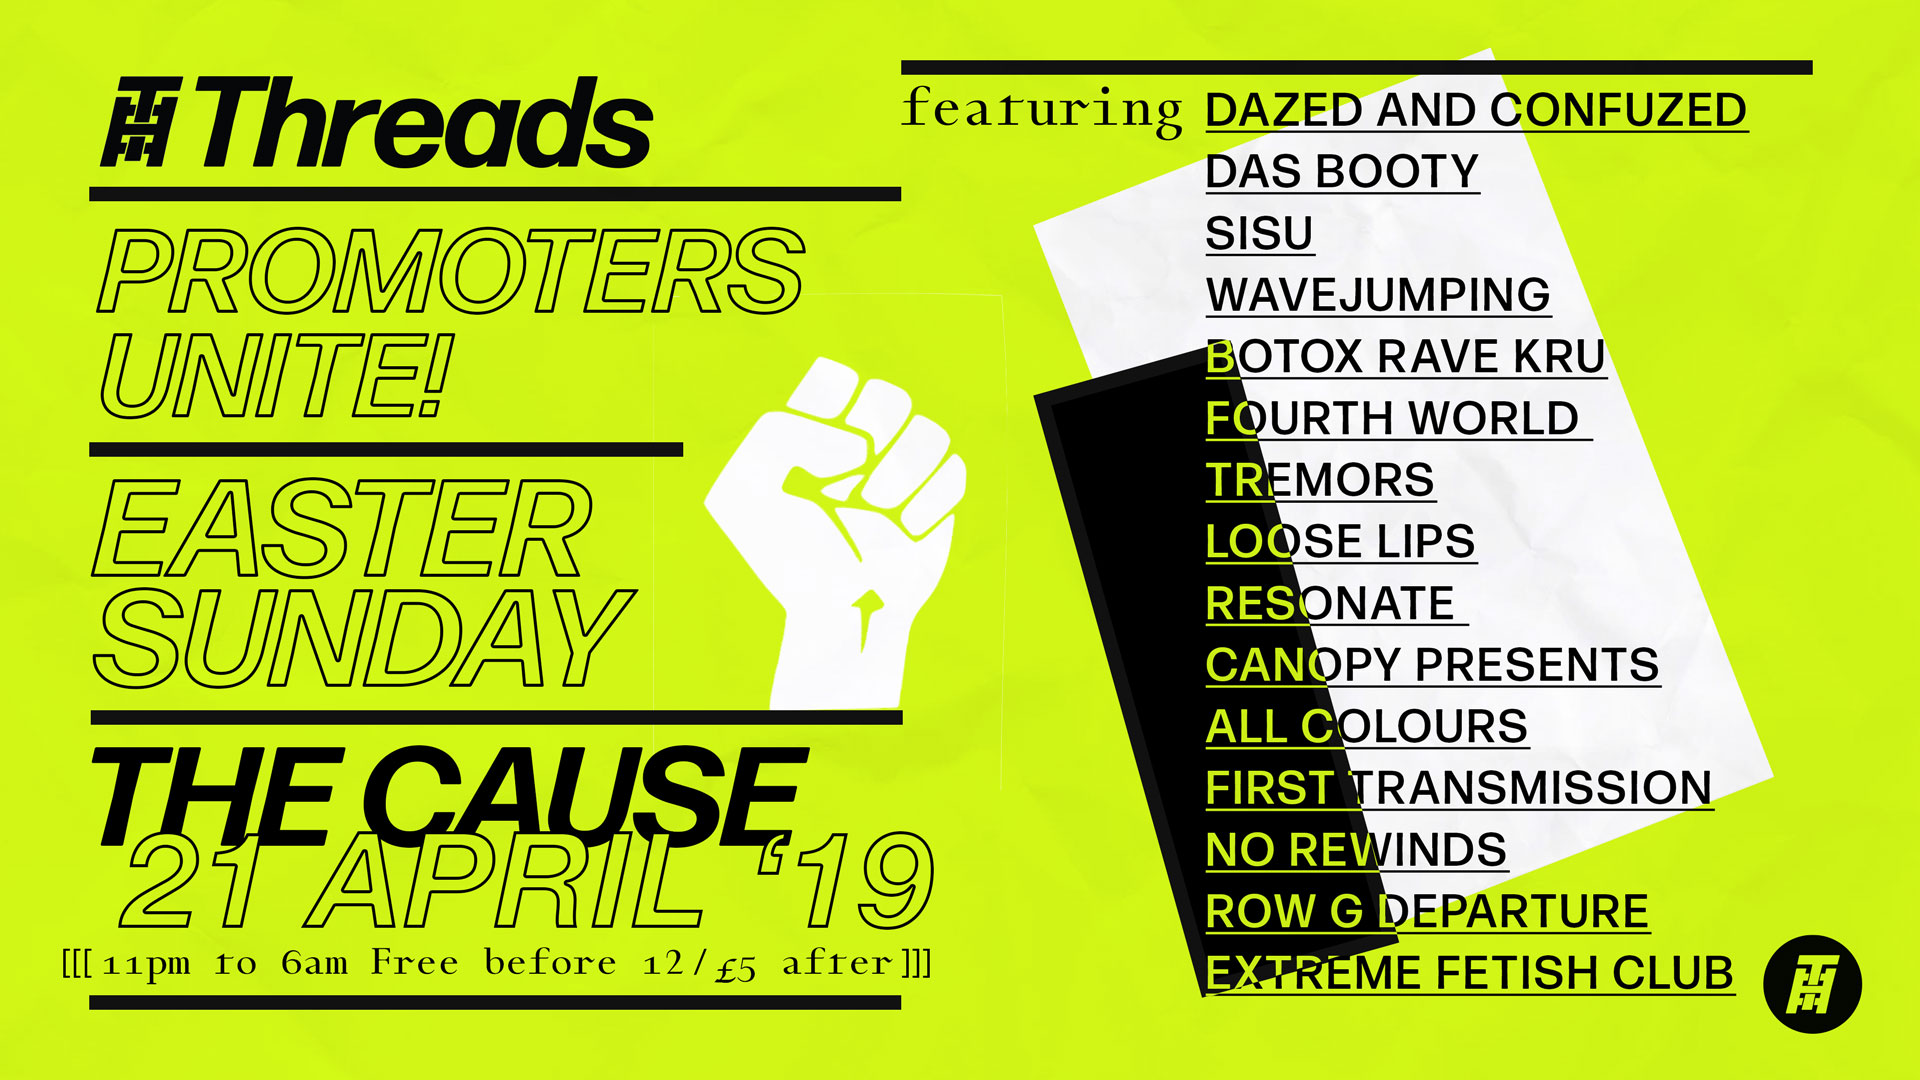 Threads Promoters Unite! Easter Sunday Rave (21/04/19)